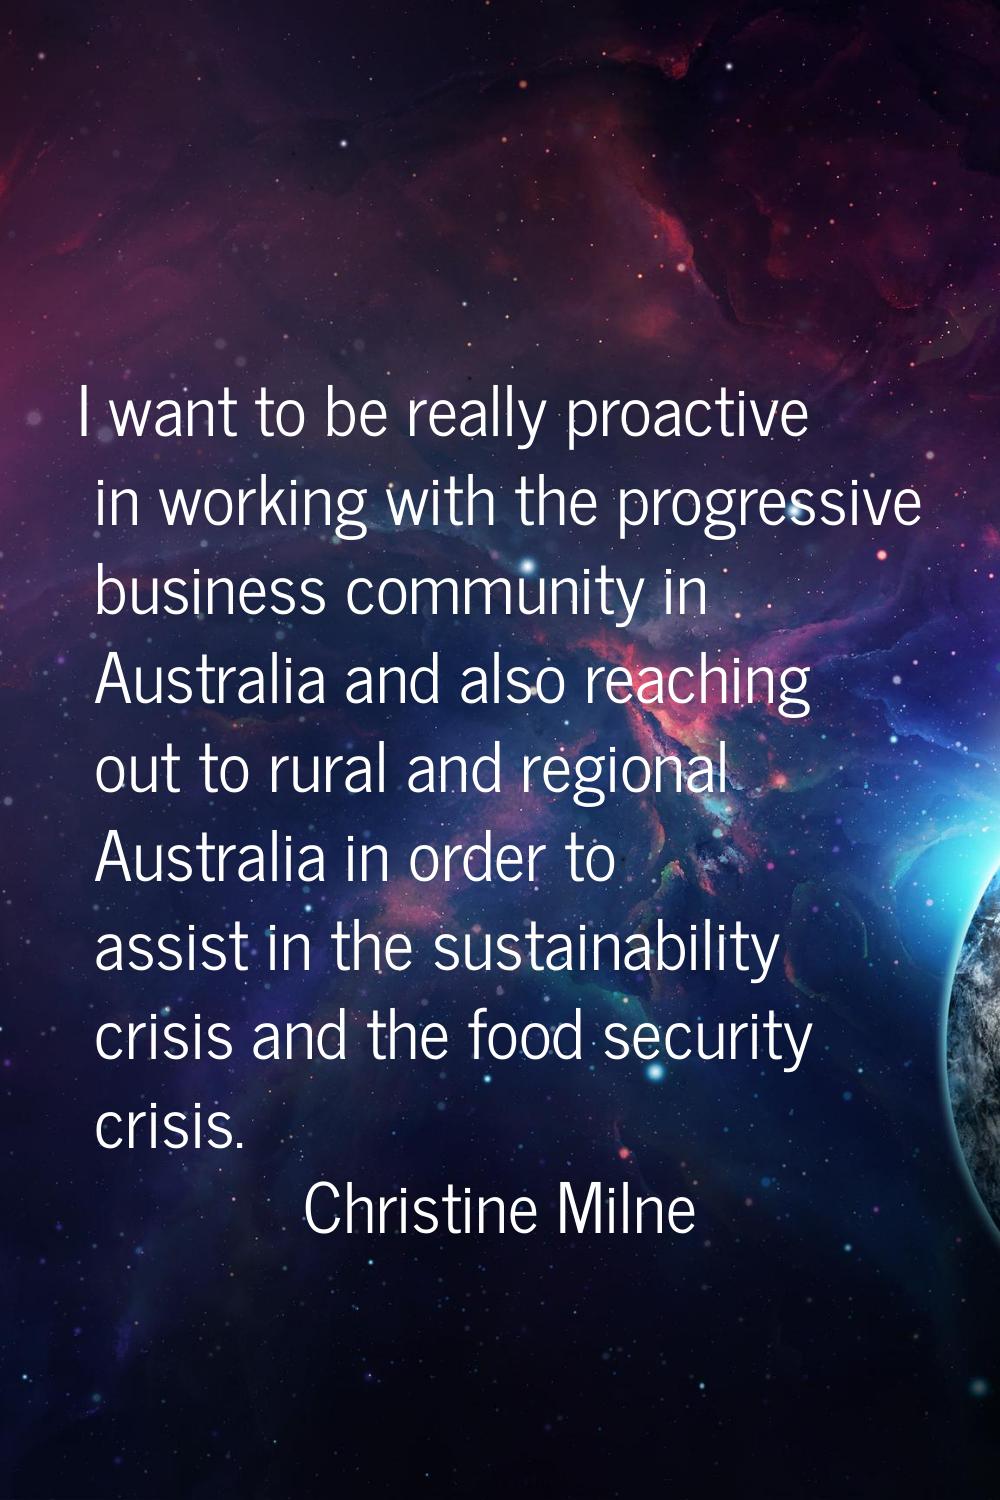 I want to be really proactive in working with the progressive business community in Australia and a